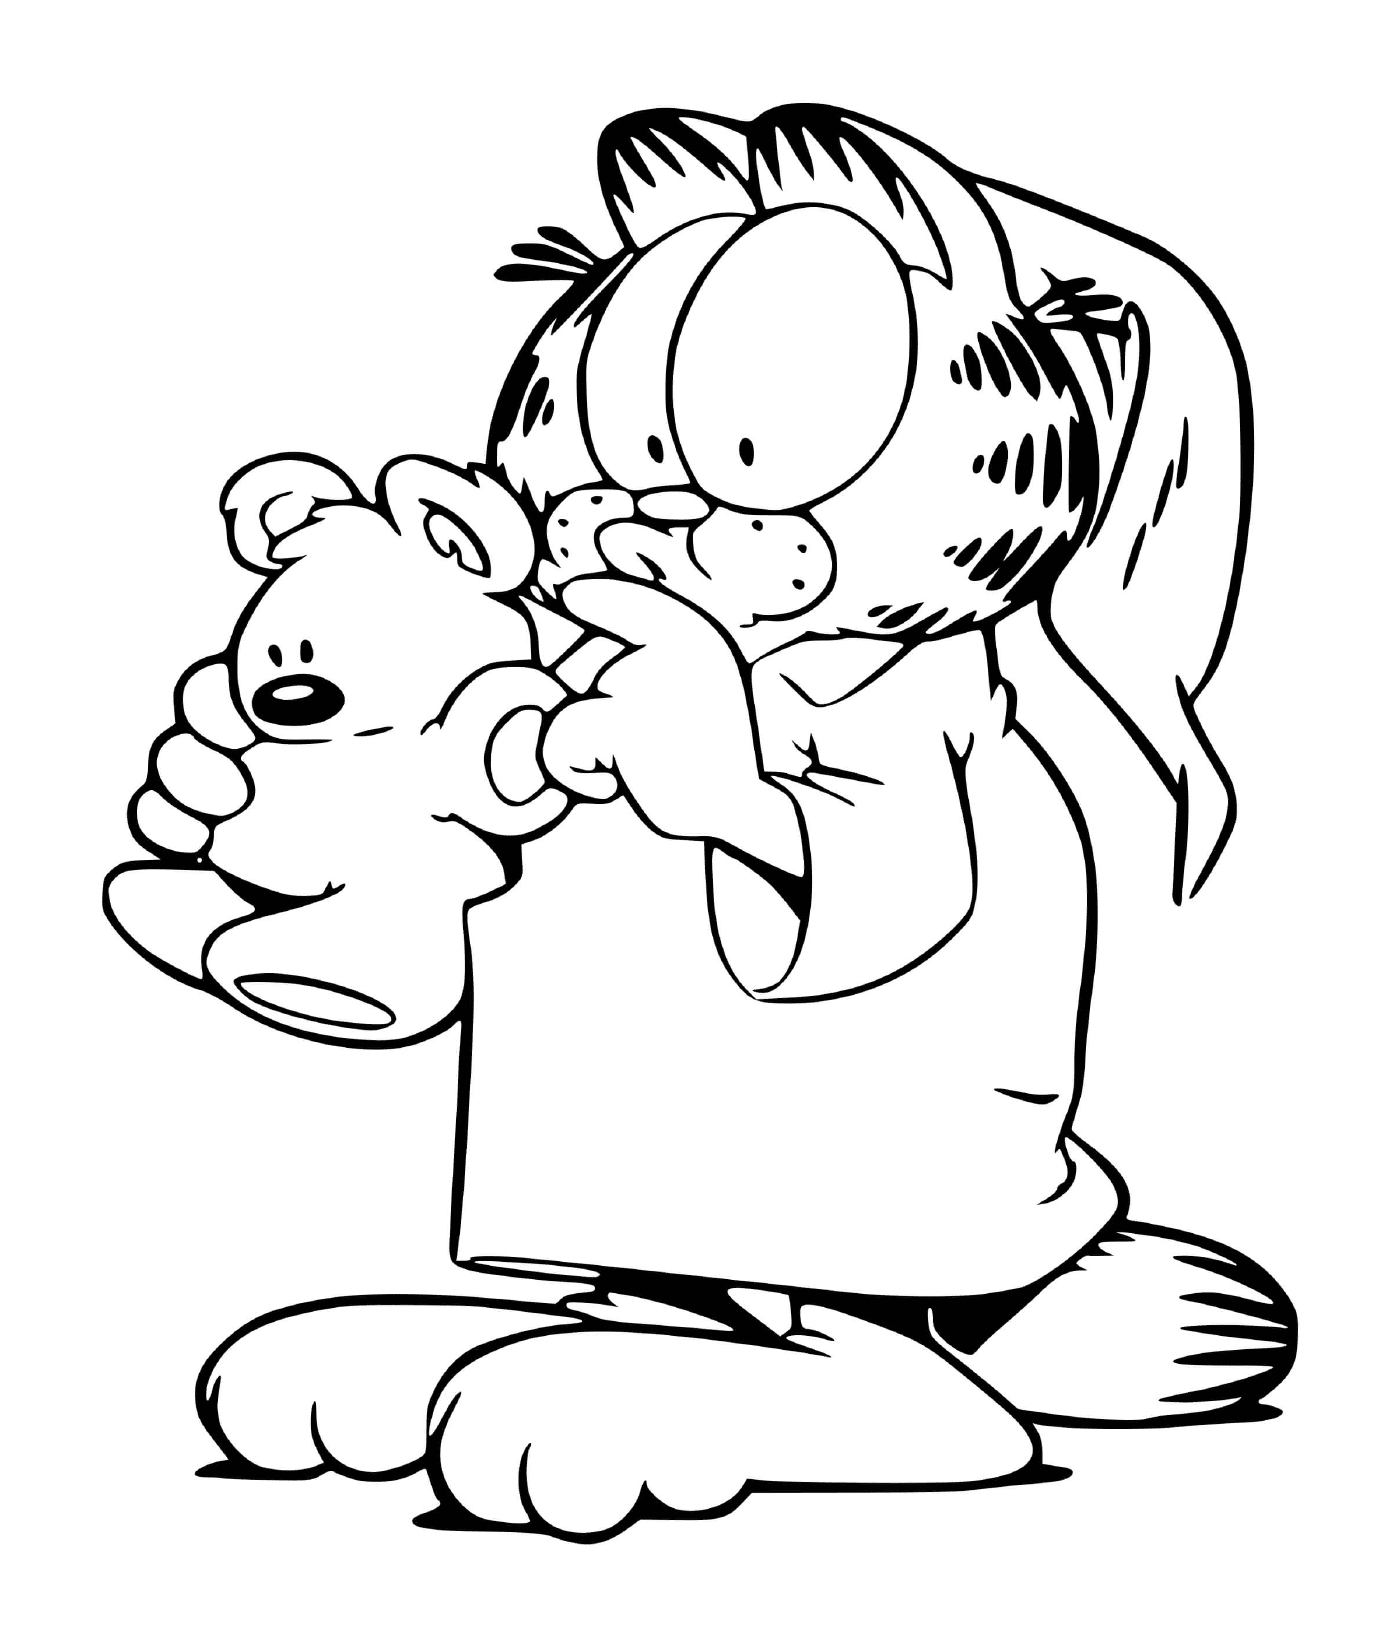  Garfield in pajamas with his teddy bear 